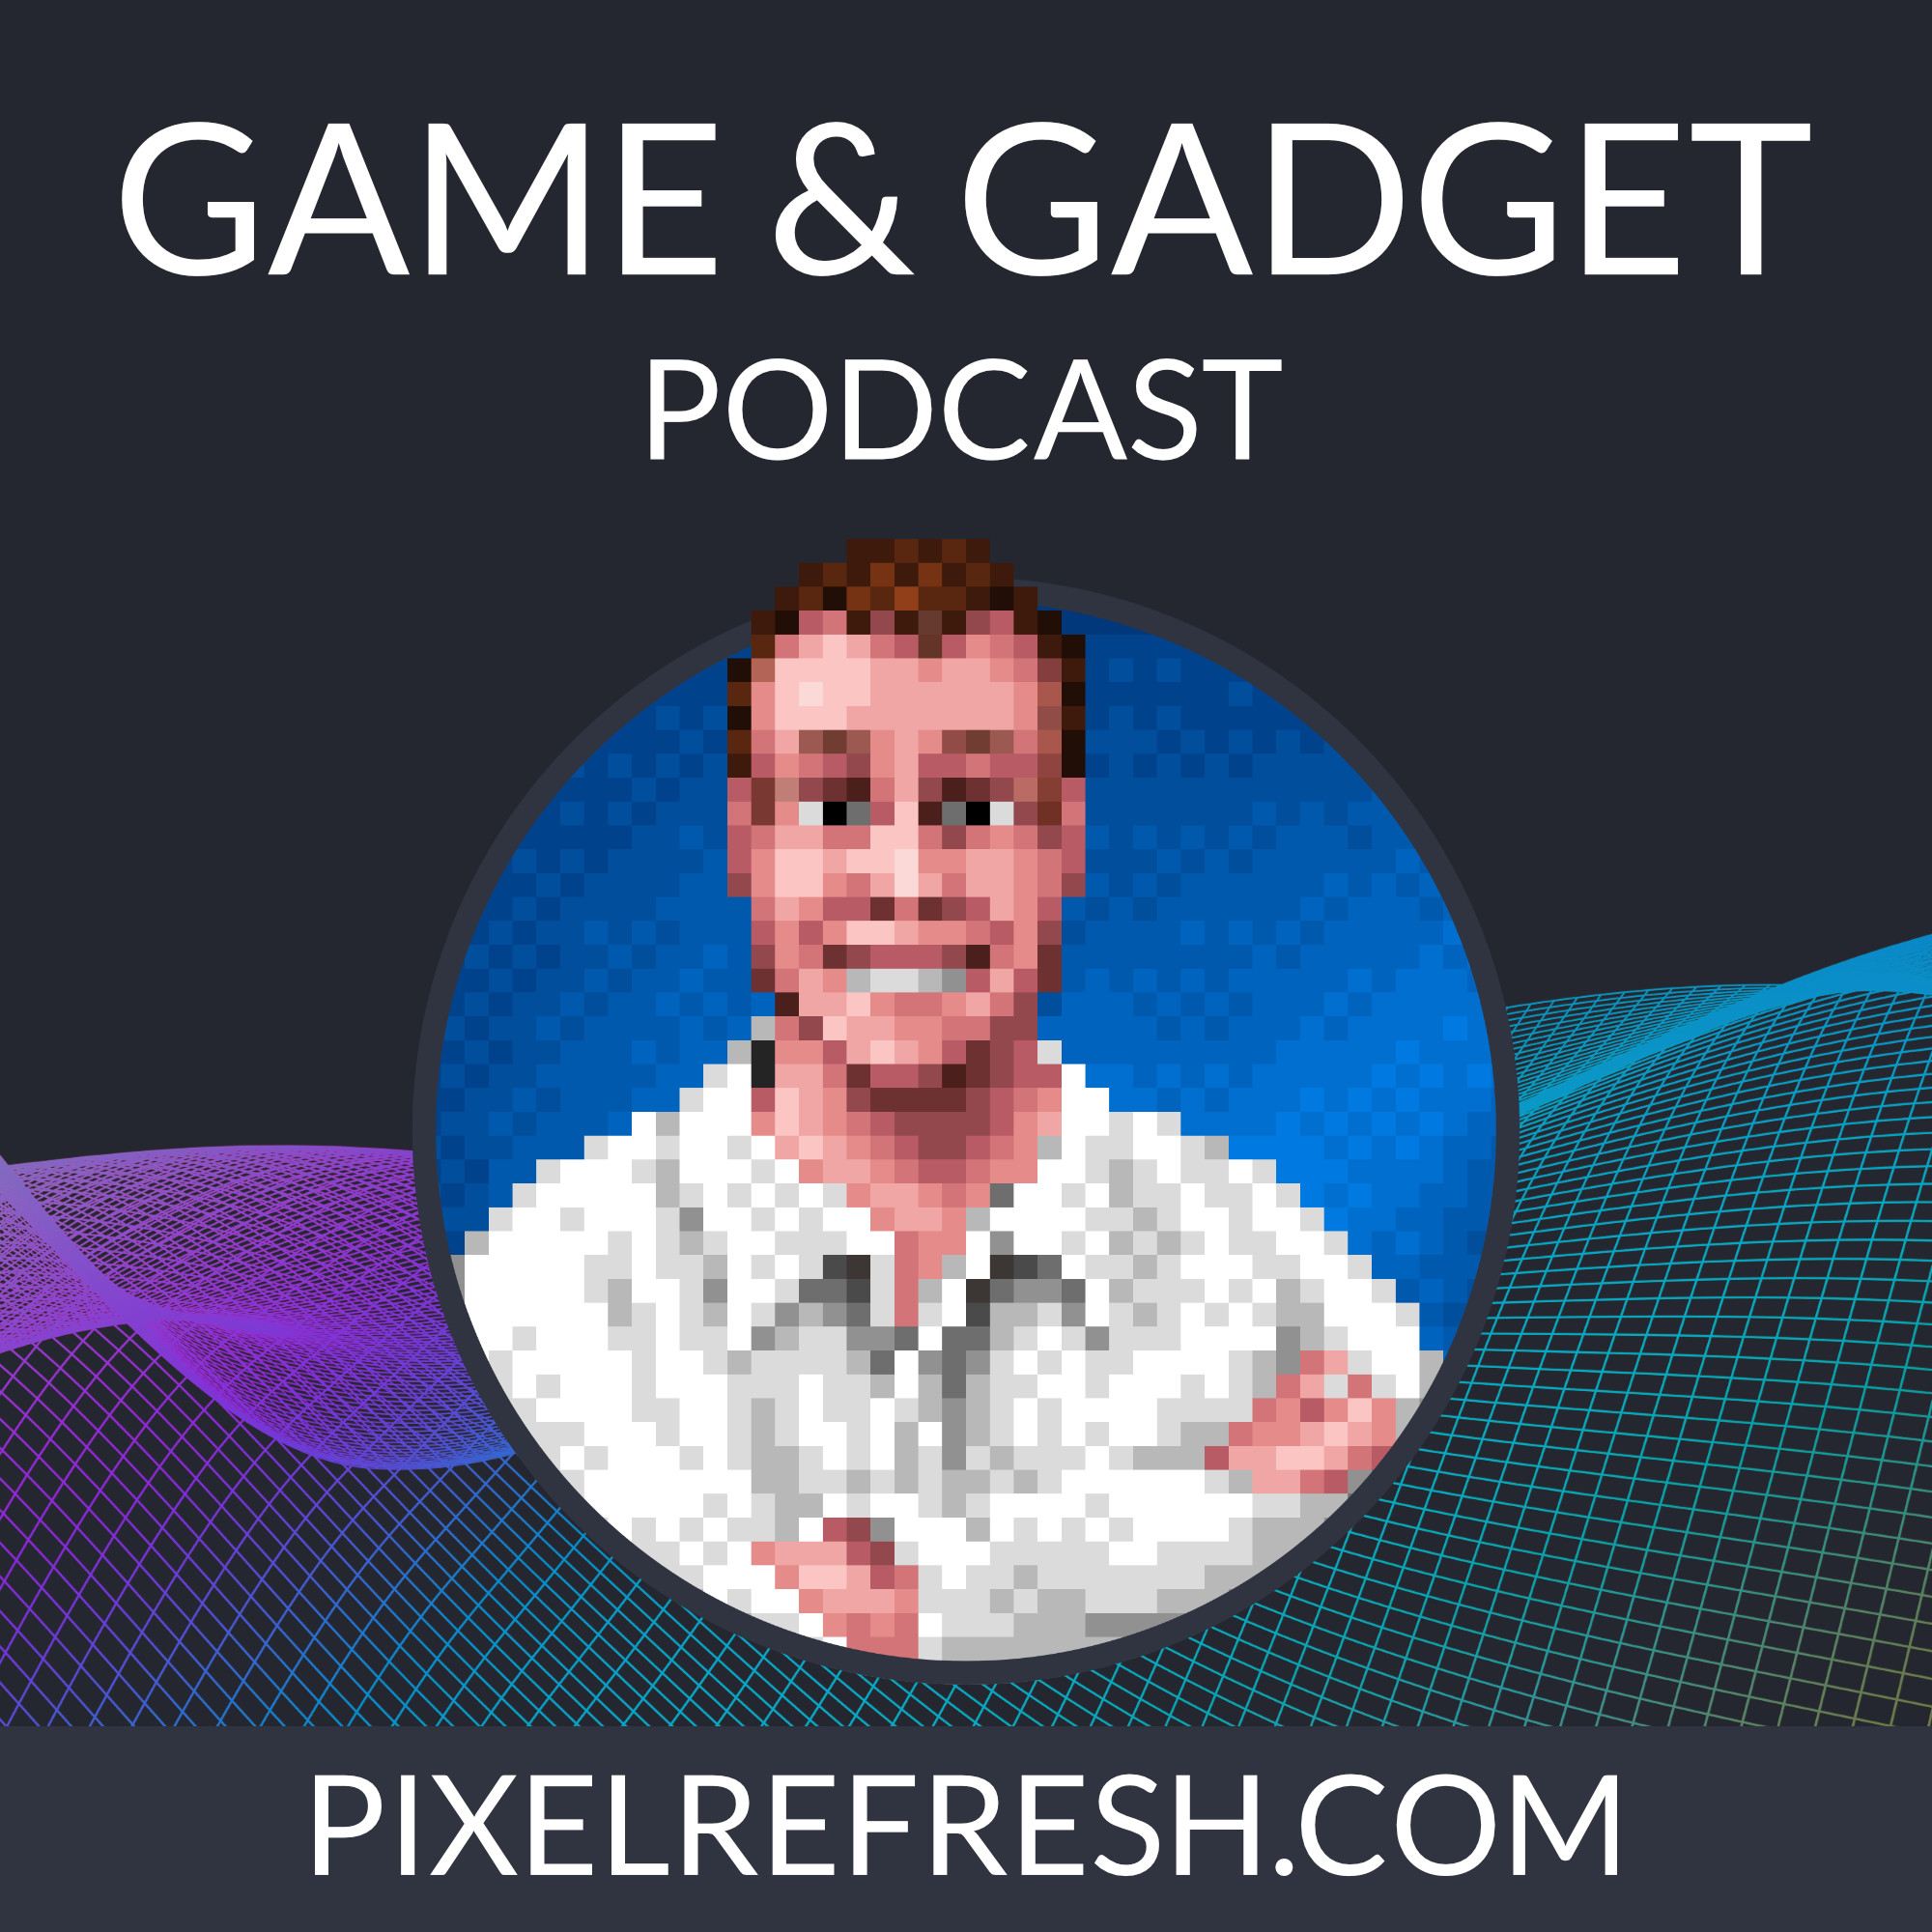 Game & Gadget Podcast